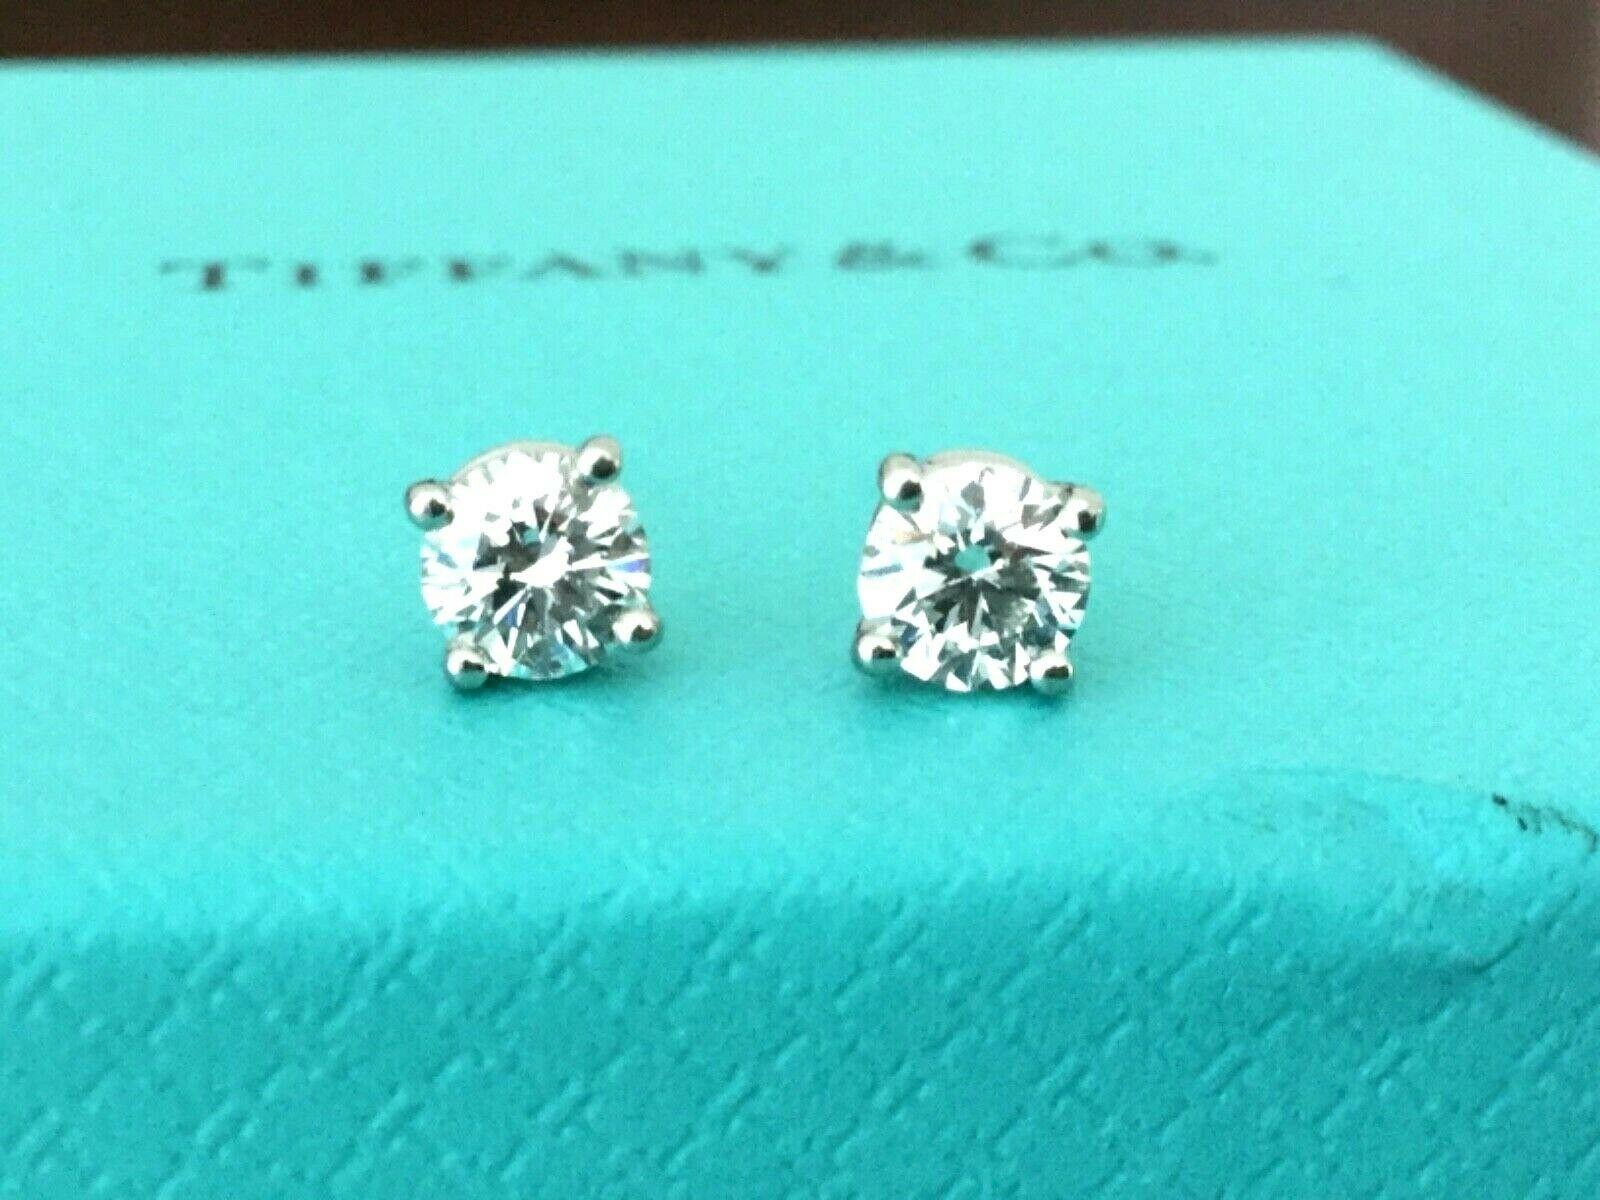 Offered for your consideration is a like new set of platinum and diamond Tiffany & Co Stud earrings with the original Tiffany diamond certificates.  It is super rare to find a set of Tiffany stud earrings with the original paperwork as 99% of